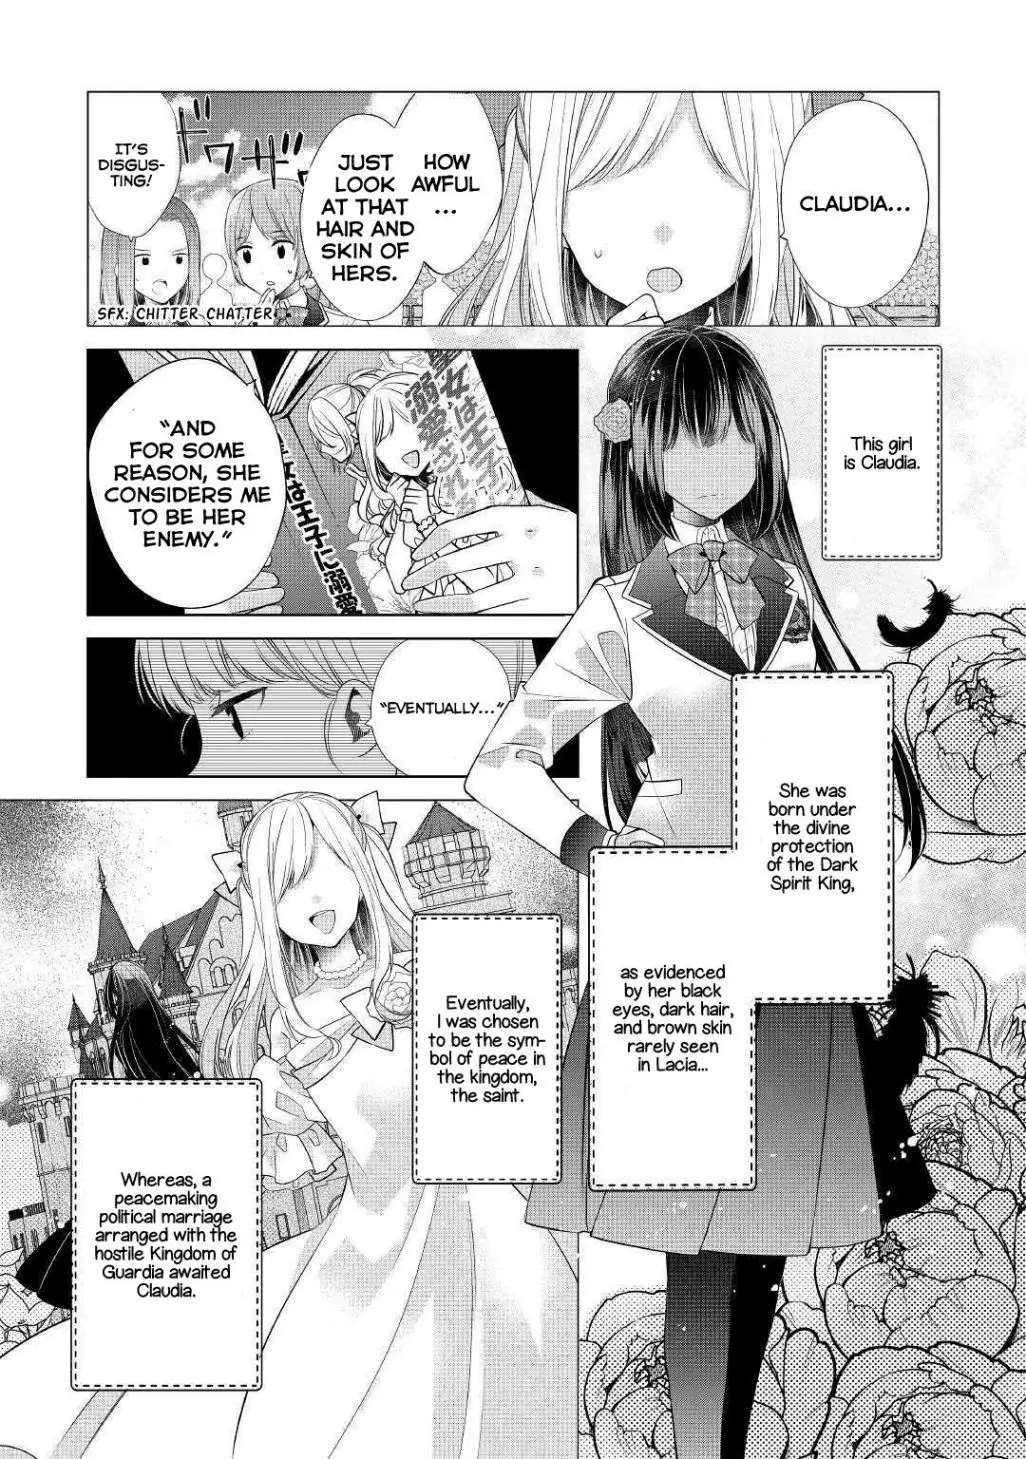 I'm Not a Villainess!! Just Because I Can Control Darkness Doesn’t Mean I’m a Bad Person! - 1 page 3